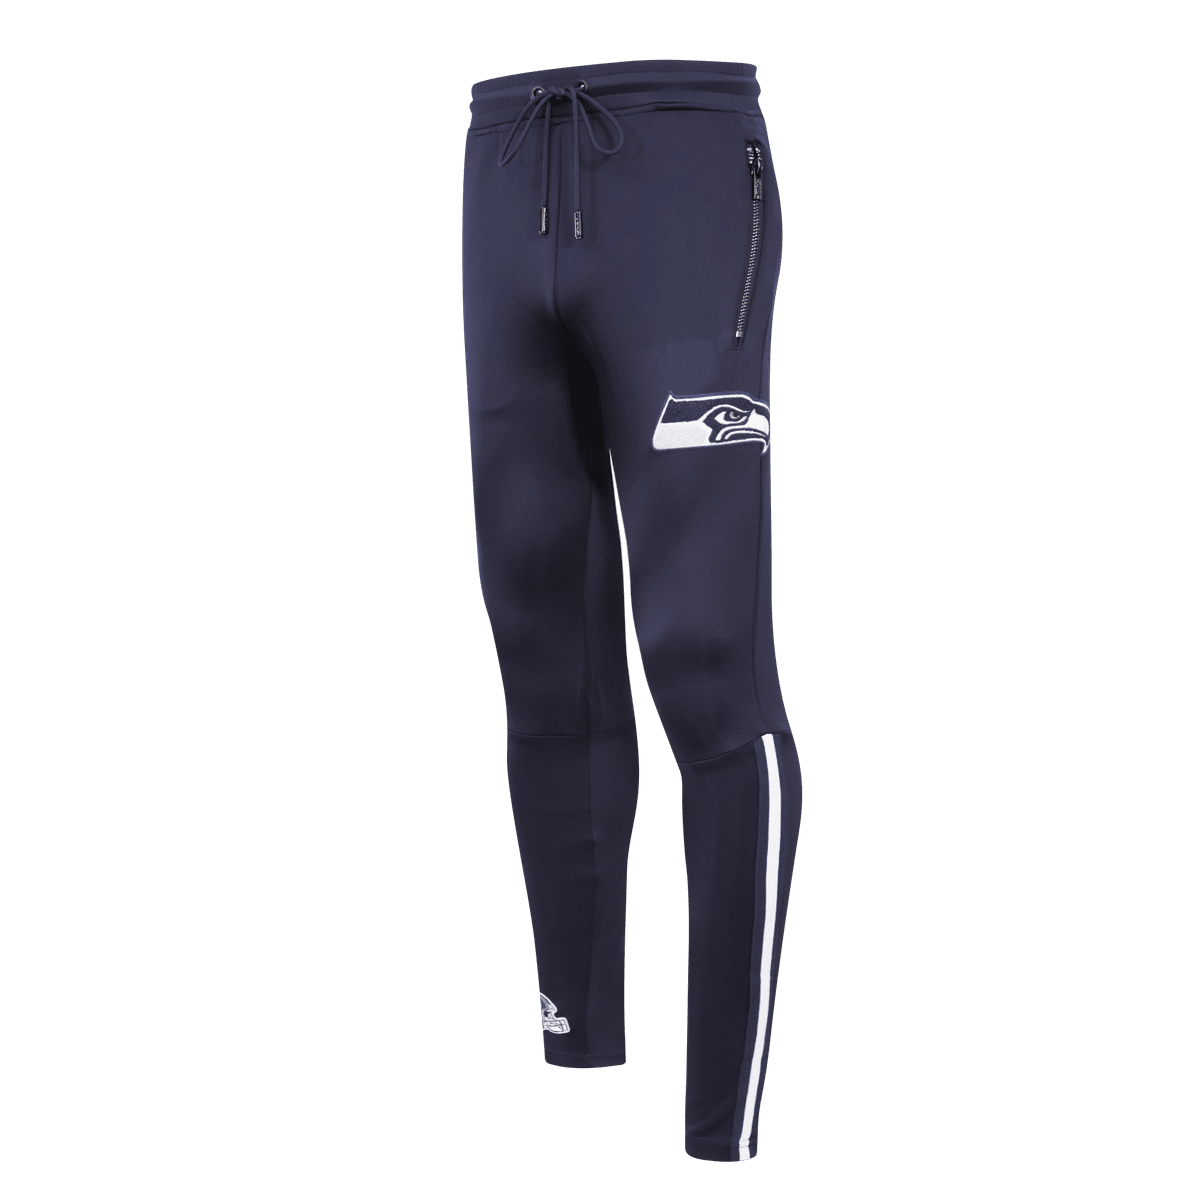 SEATTLE SEAHAWKS CLASSIC DK TRACK PANT (MIDNIGHT NAVY)